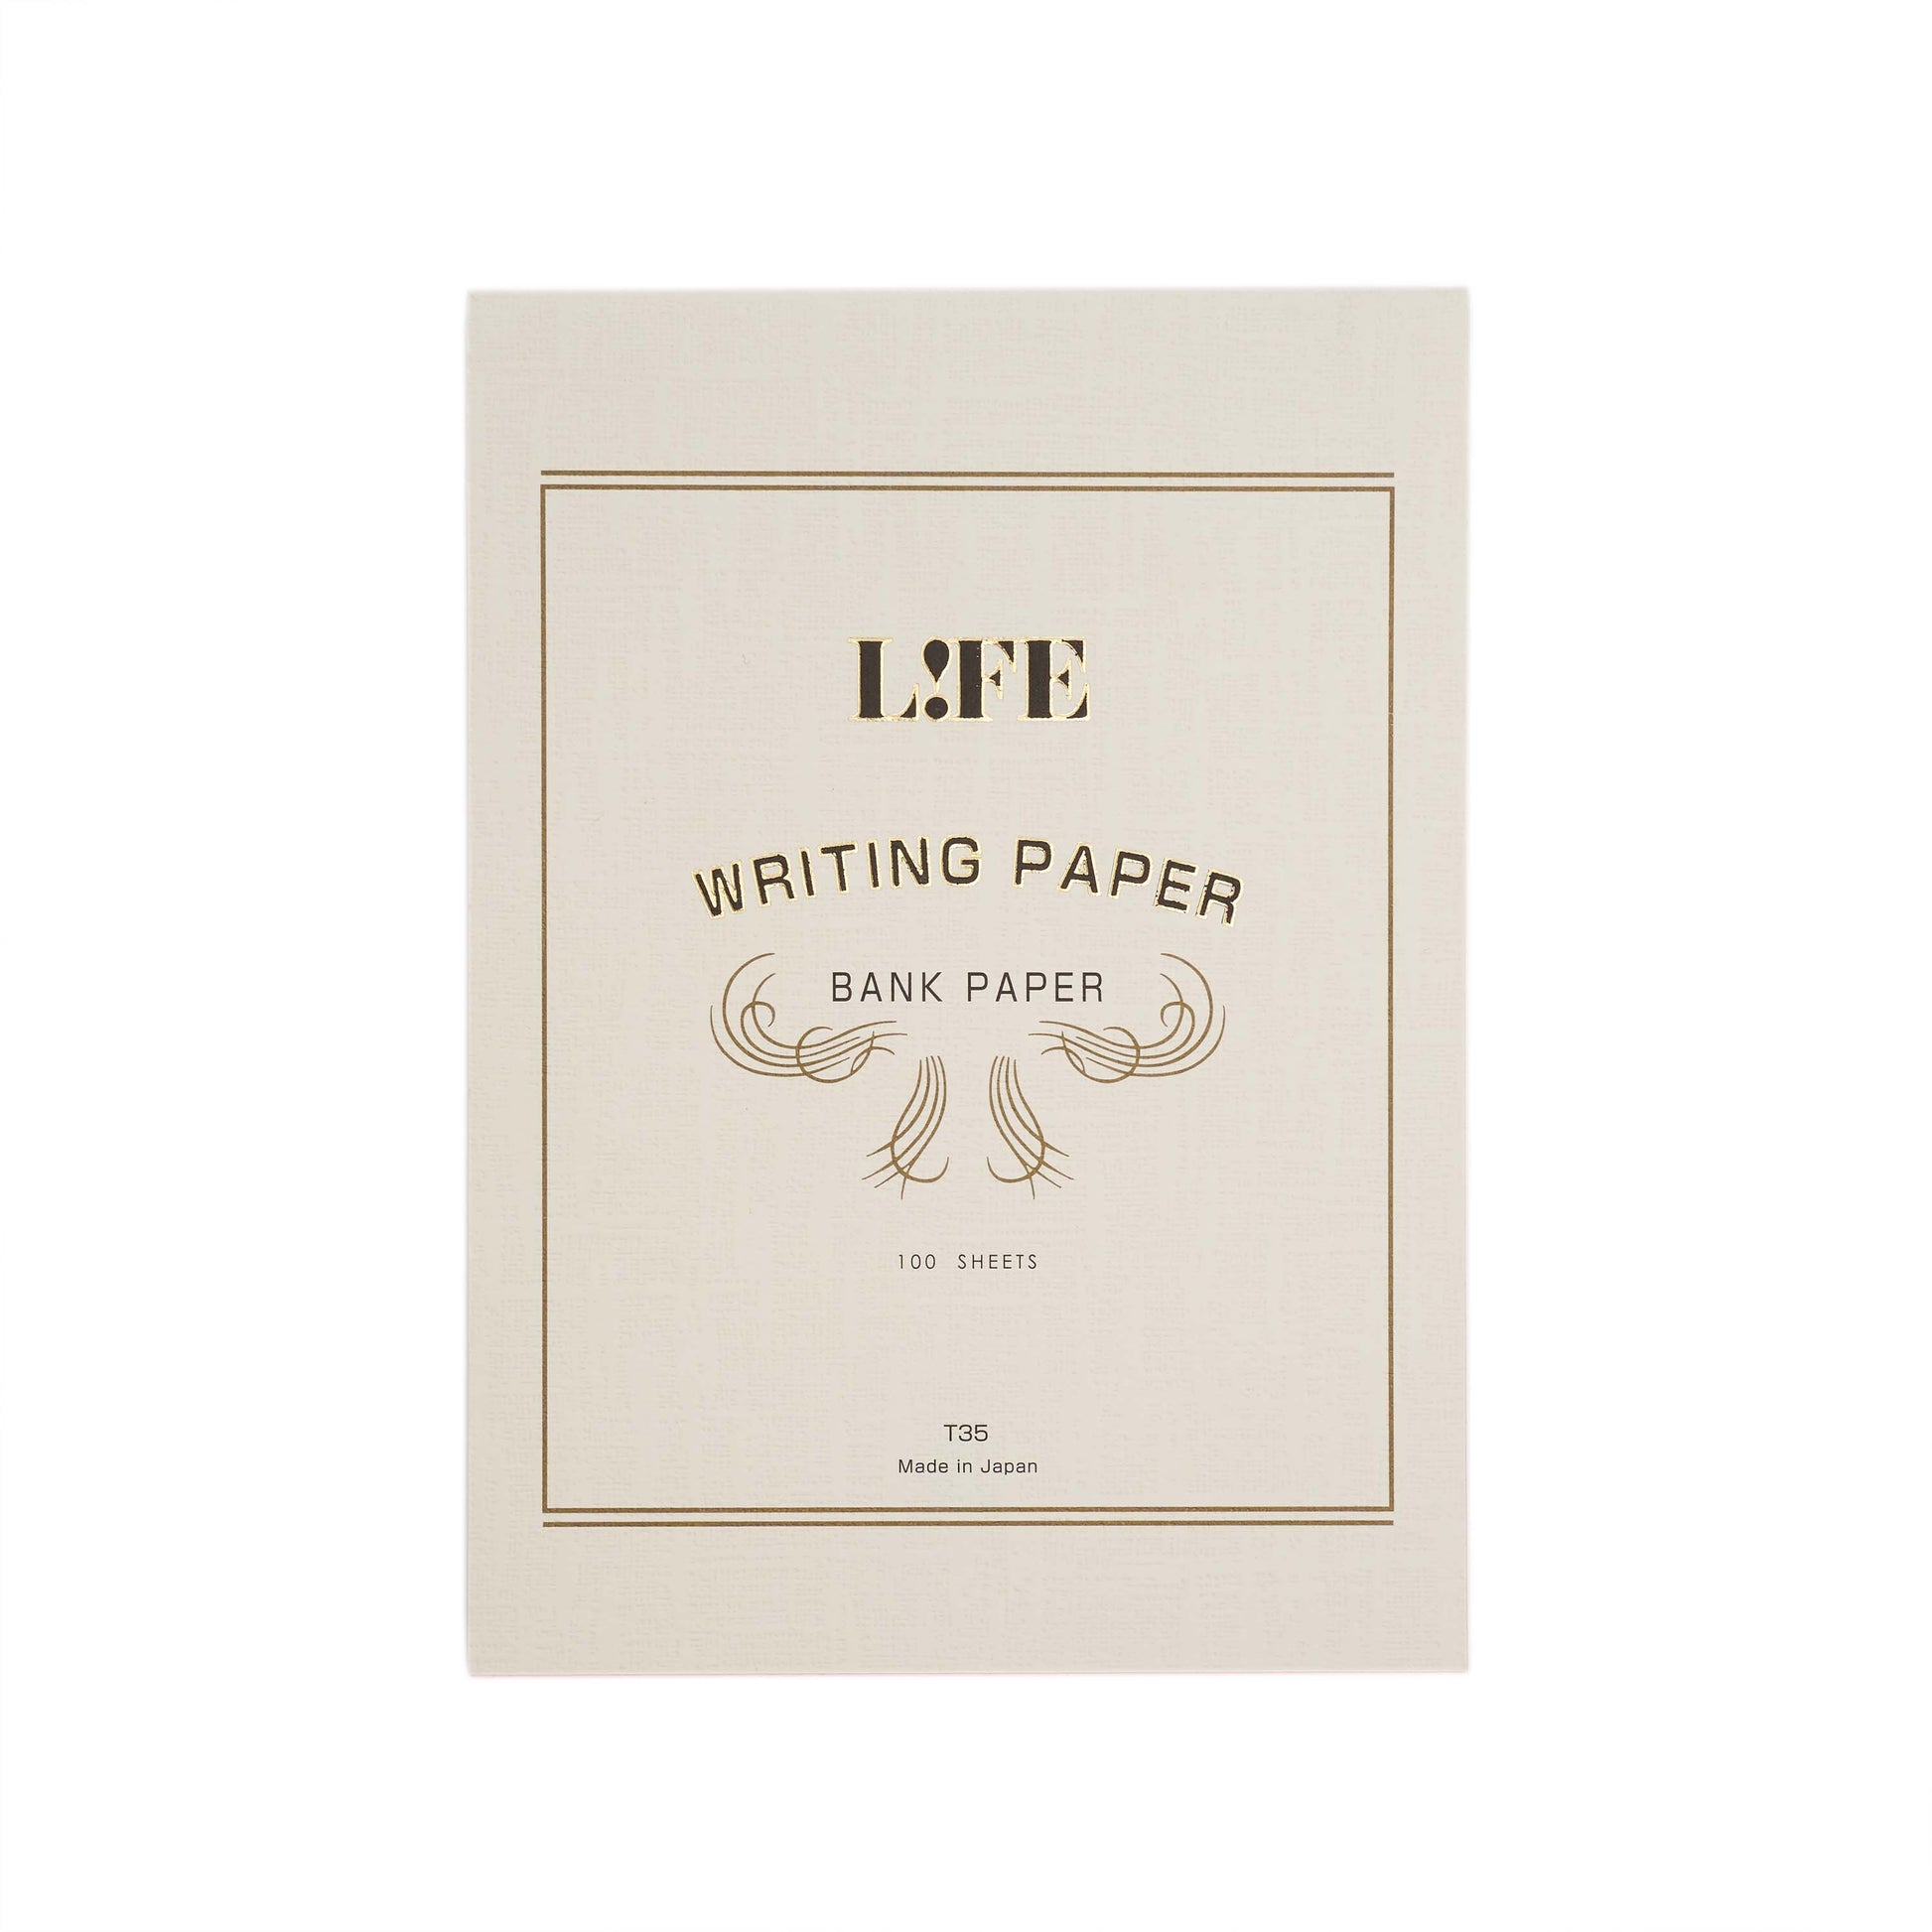 Life Bank Paper Pad Fountain Pen Friendly notepad with White cover